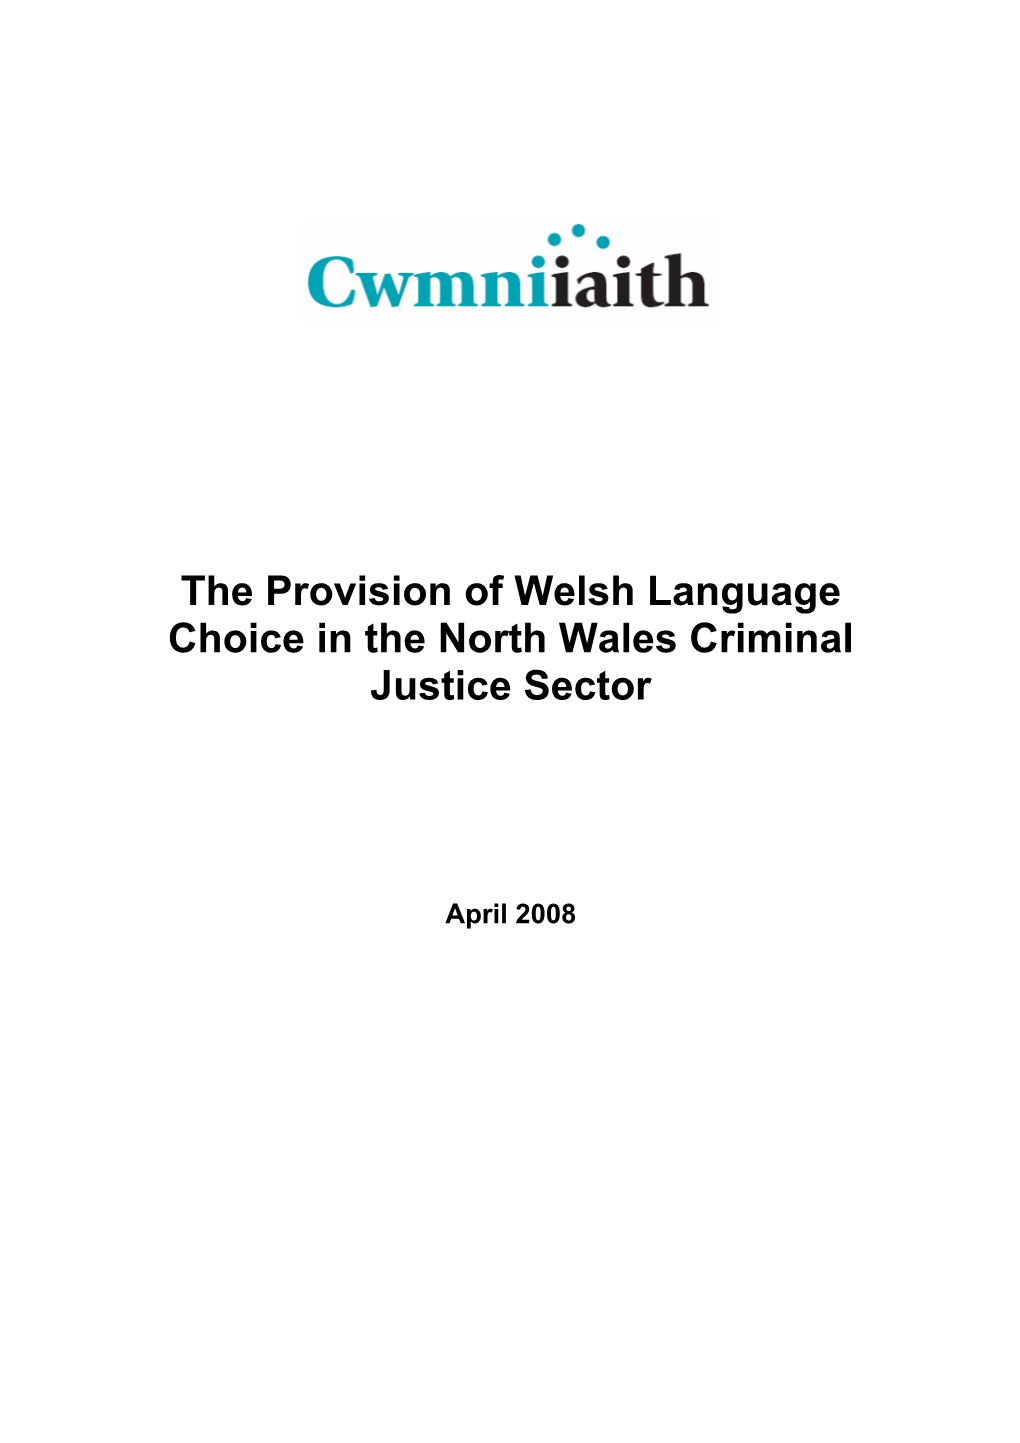 The Provision of Welsh Language Choice in the North Wales Criminal Justice Sector